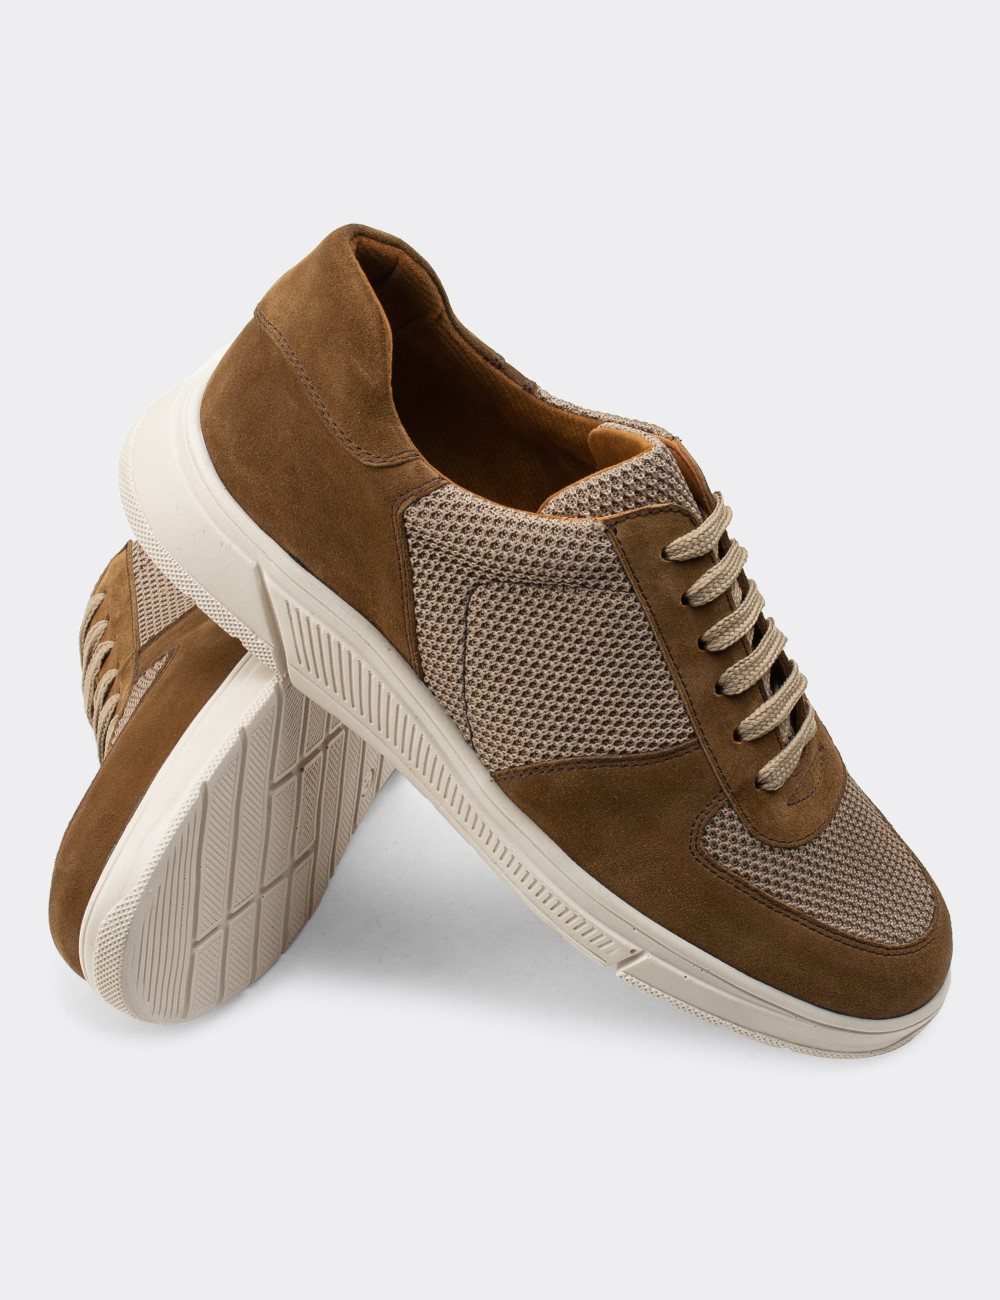 Tan Suede Leather Sneakers - 01860MTBAC01